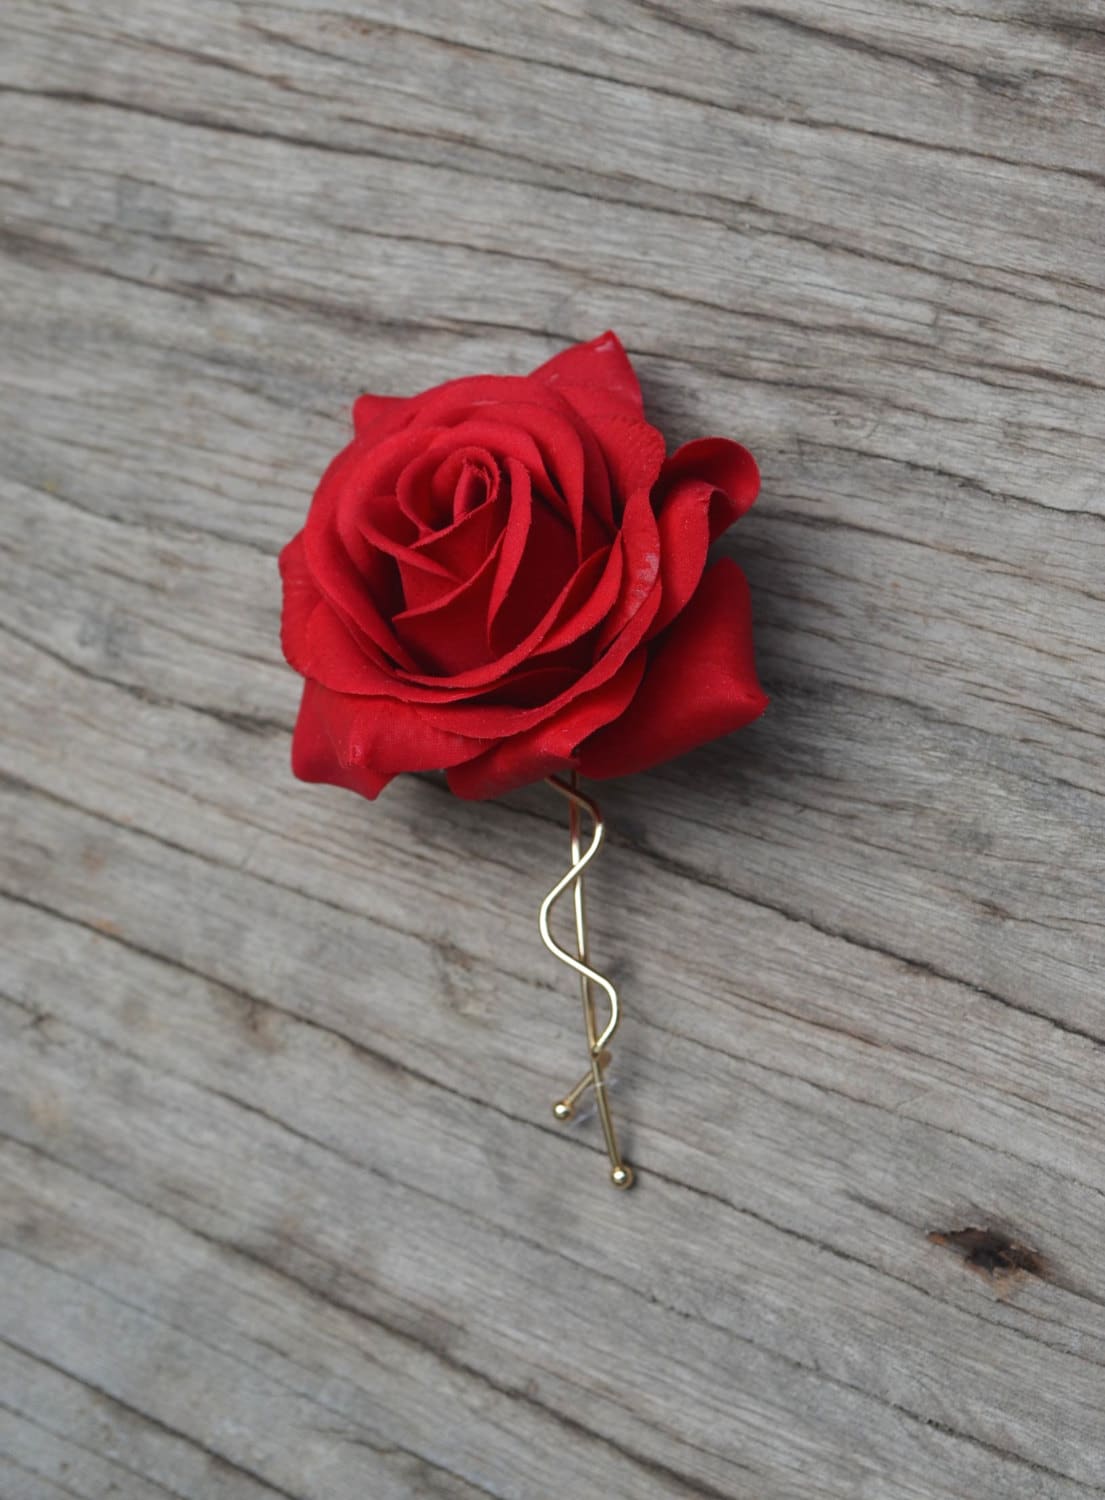 Red Rose Silk Flower Hair Clip 4 Inches Handmade Prom Pageant Bridal Wedding 